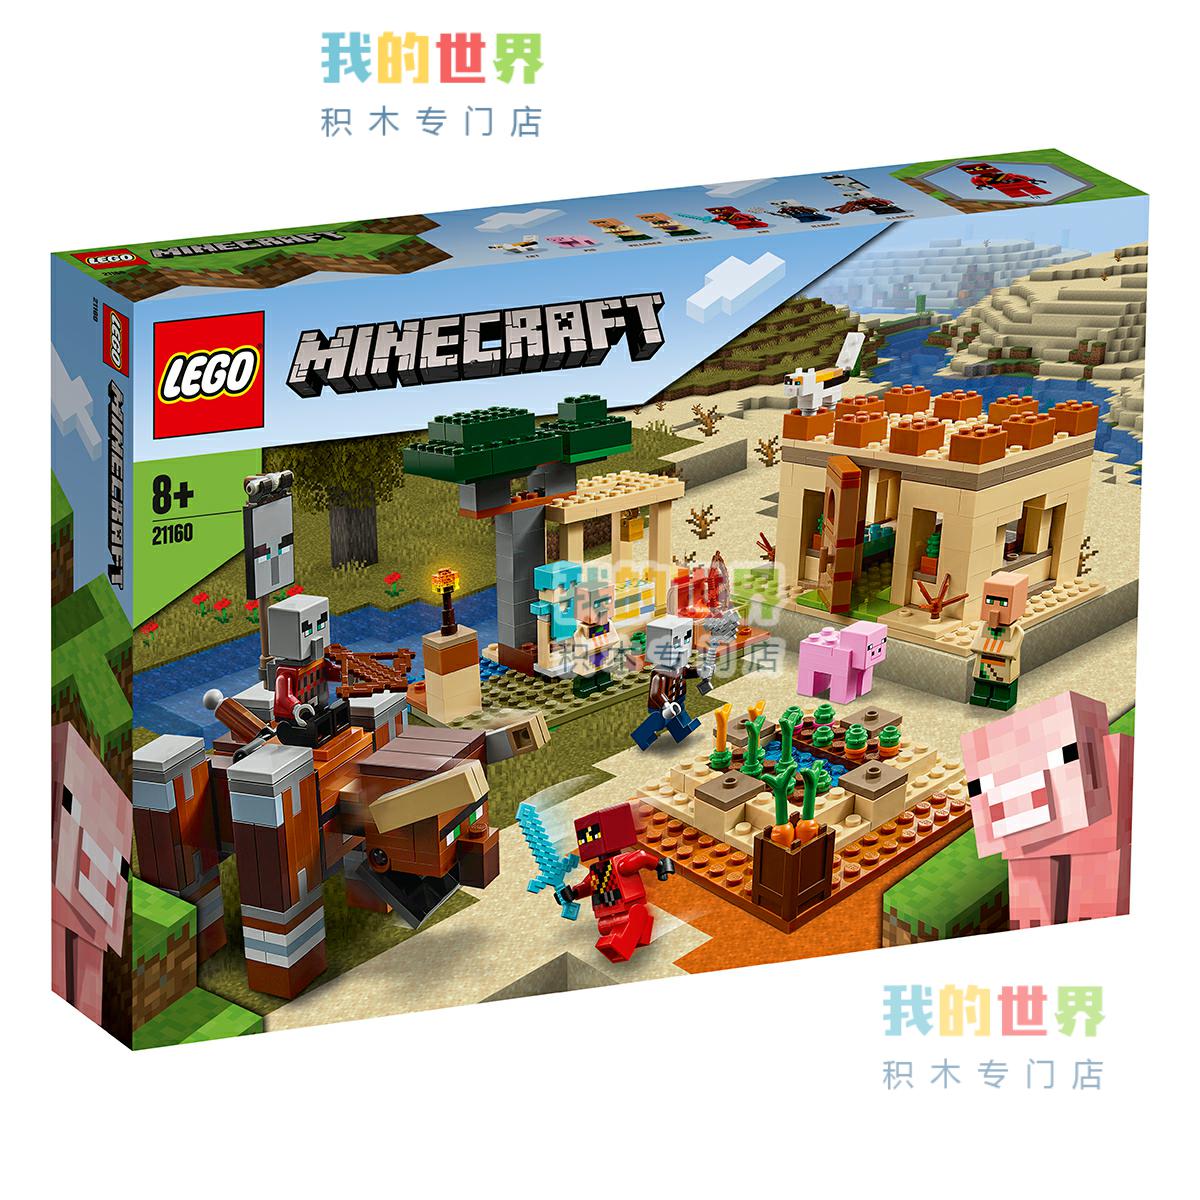 2020 new product LEGO 21160 Minecraft disaster villagers raid houses  villages  building blocks toys